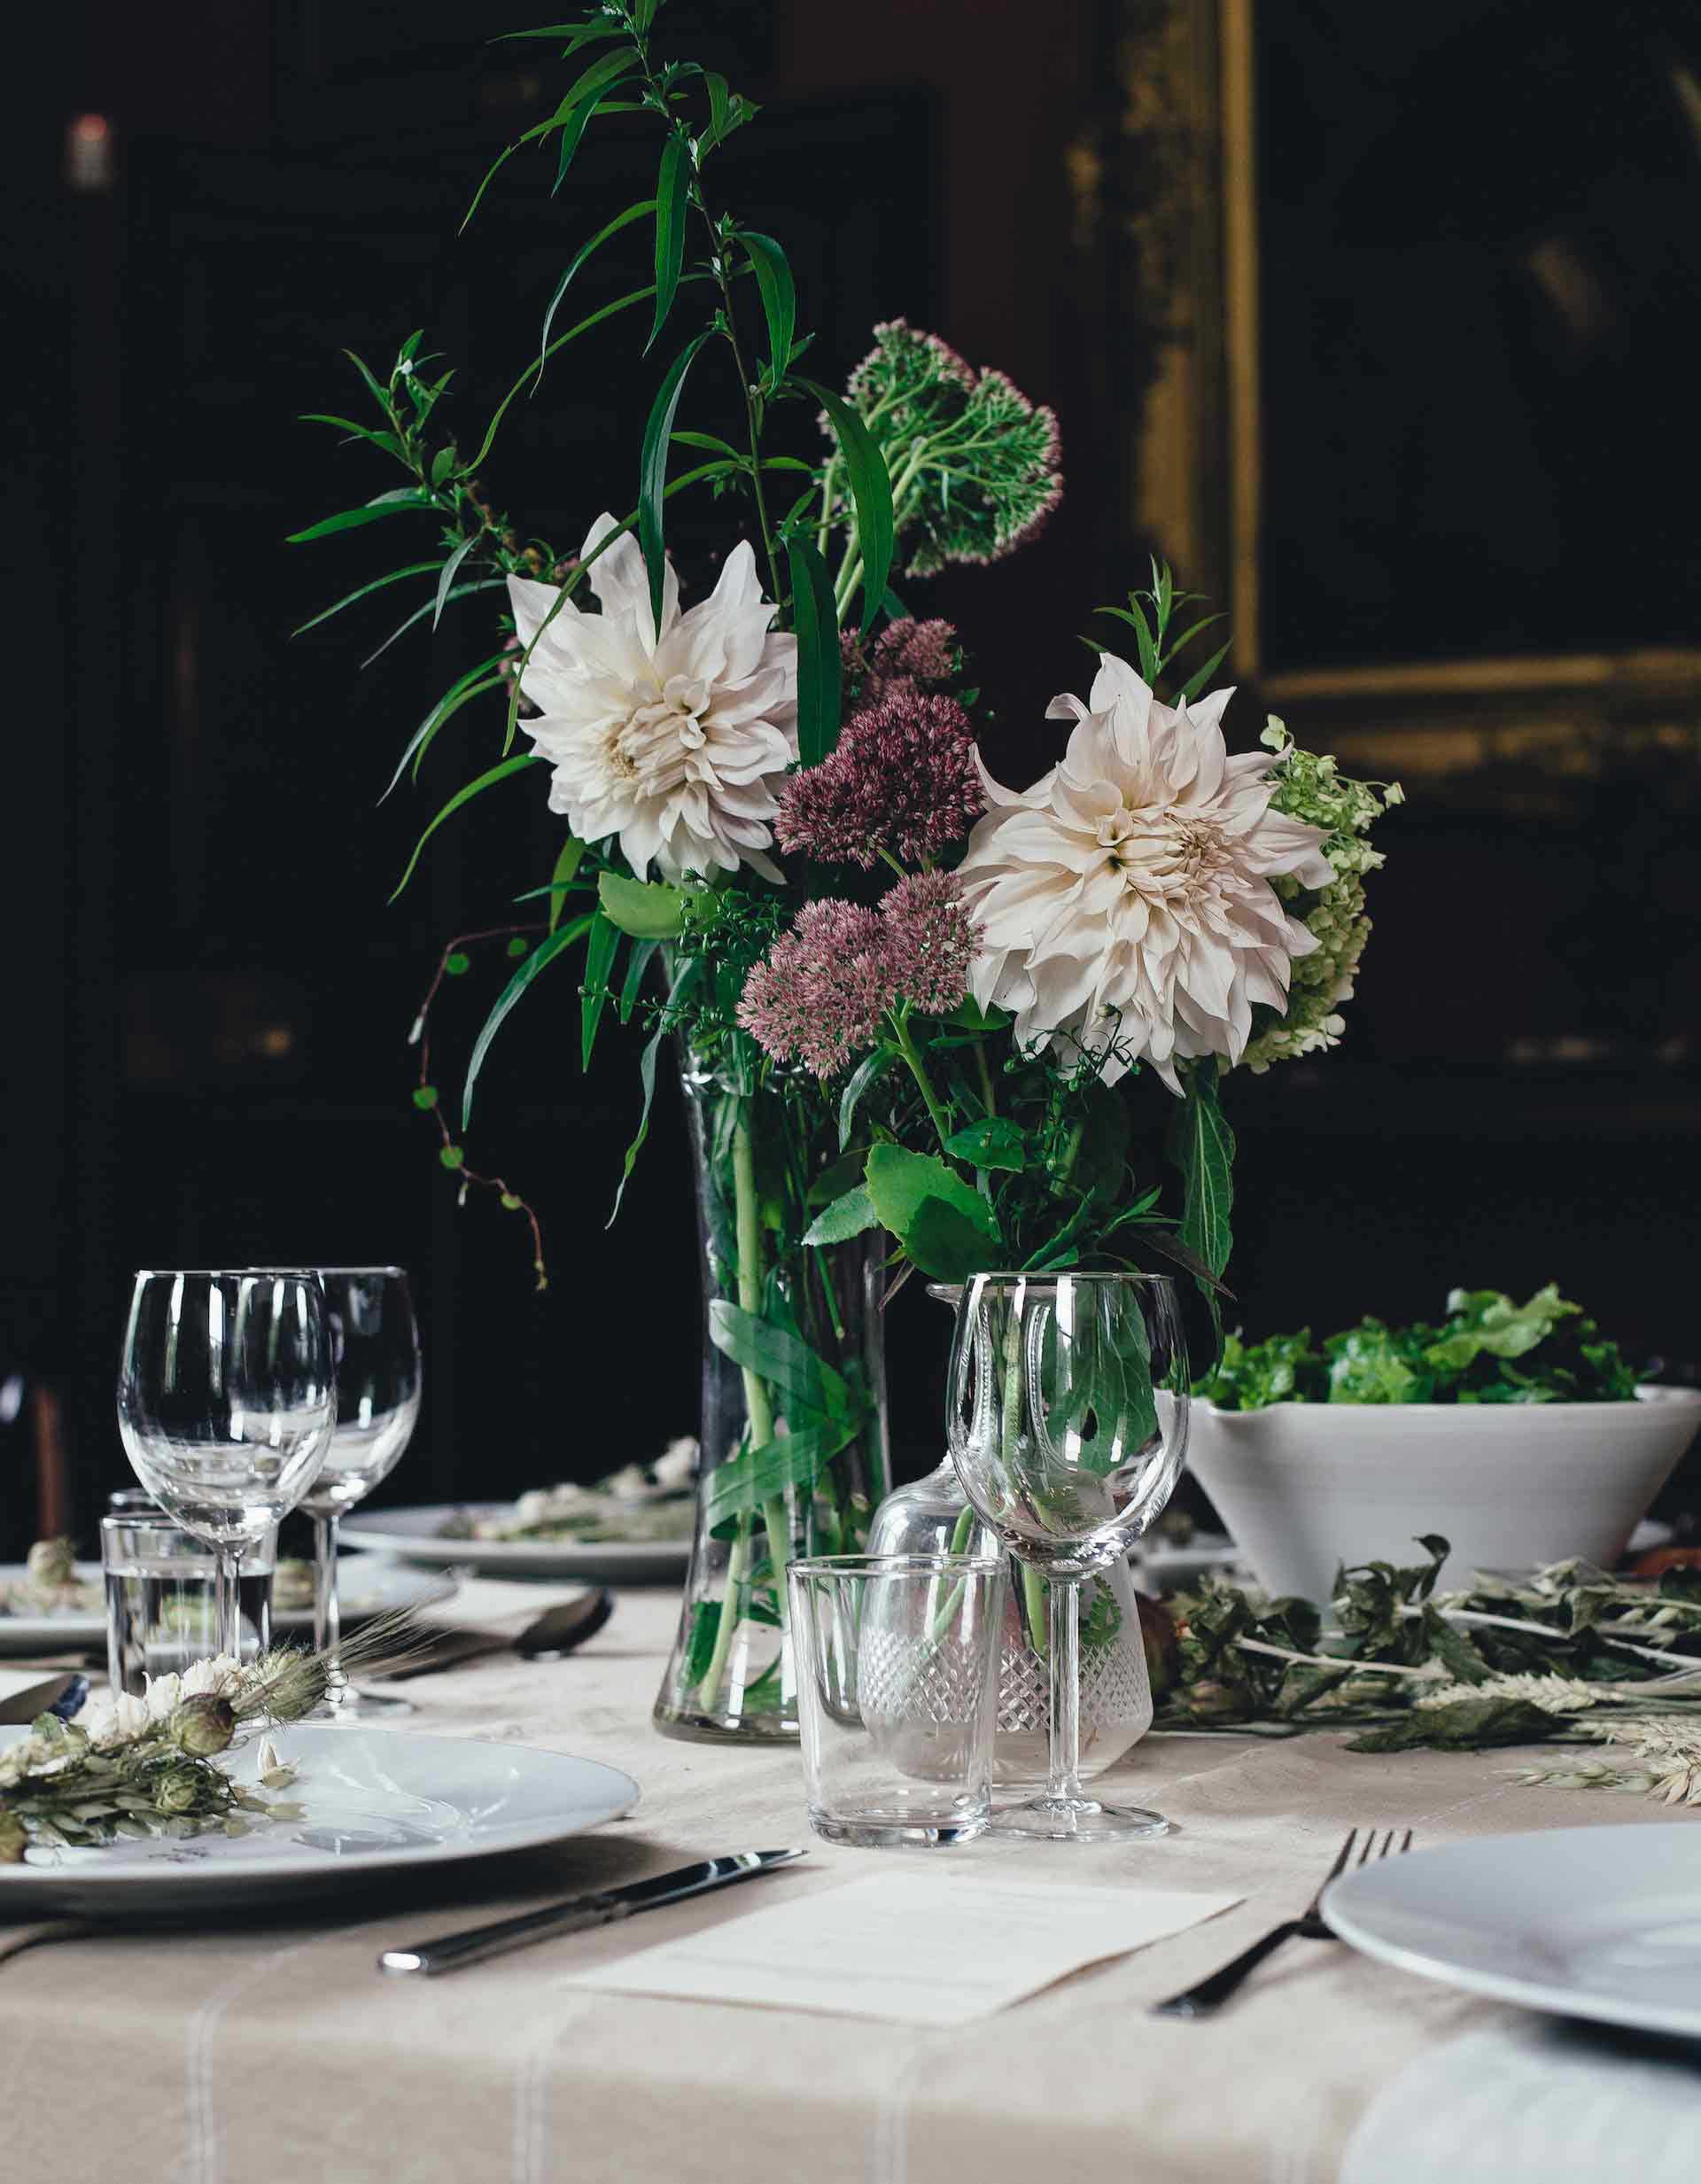 Elegant dinner table with tableware and flowers